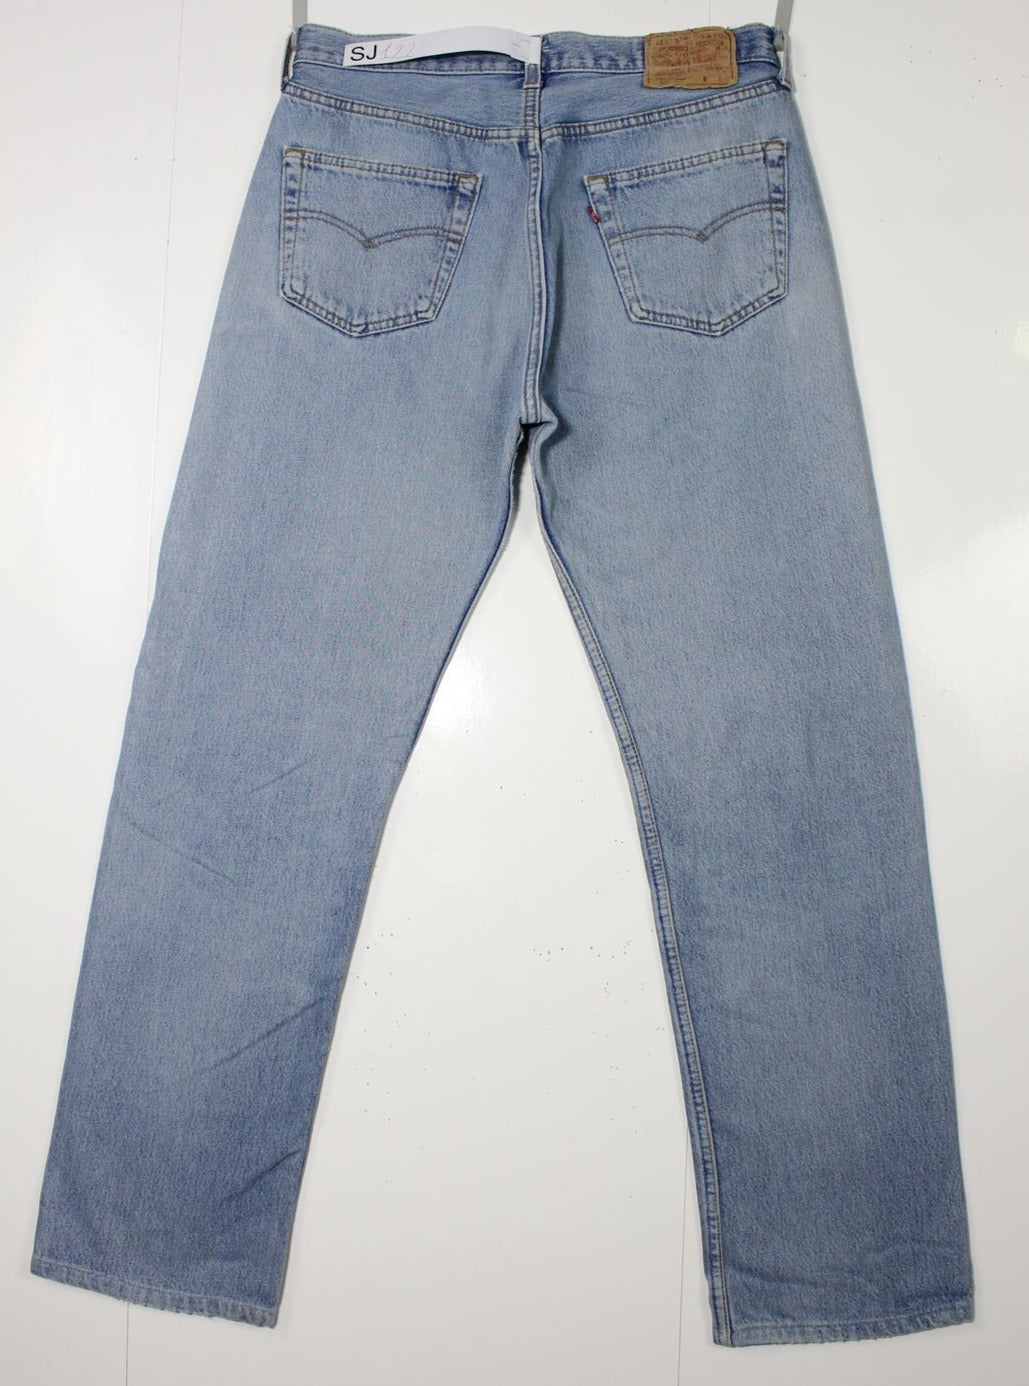 Levi's 501 Made In USA W36 L34 Jeans Vintage